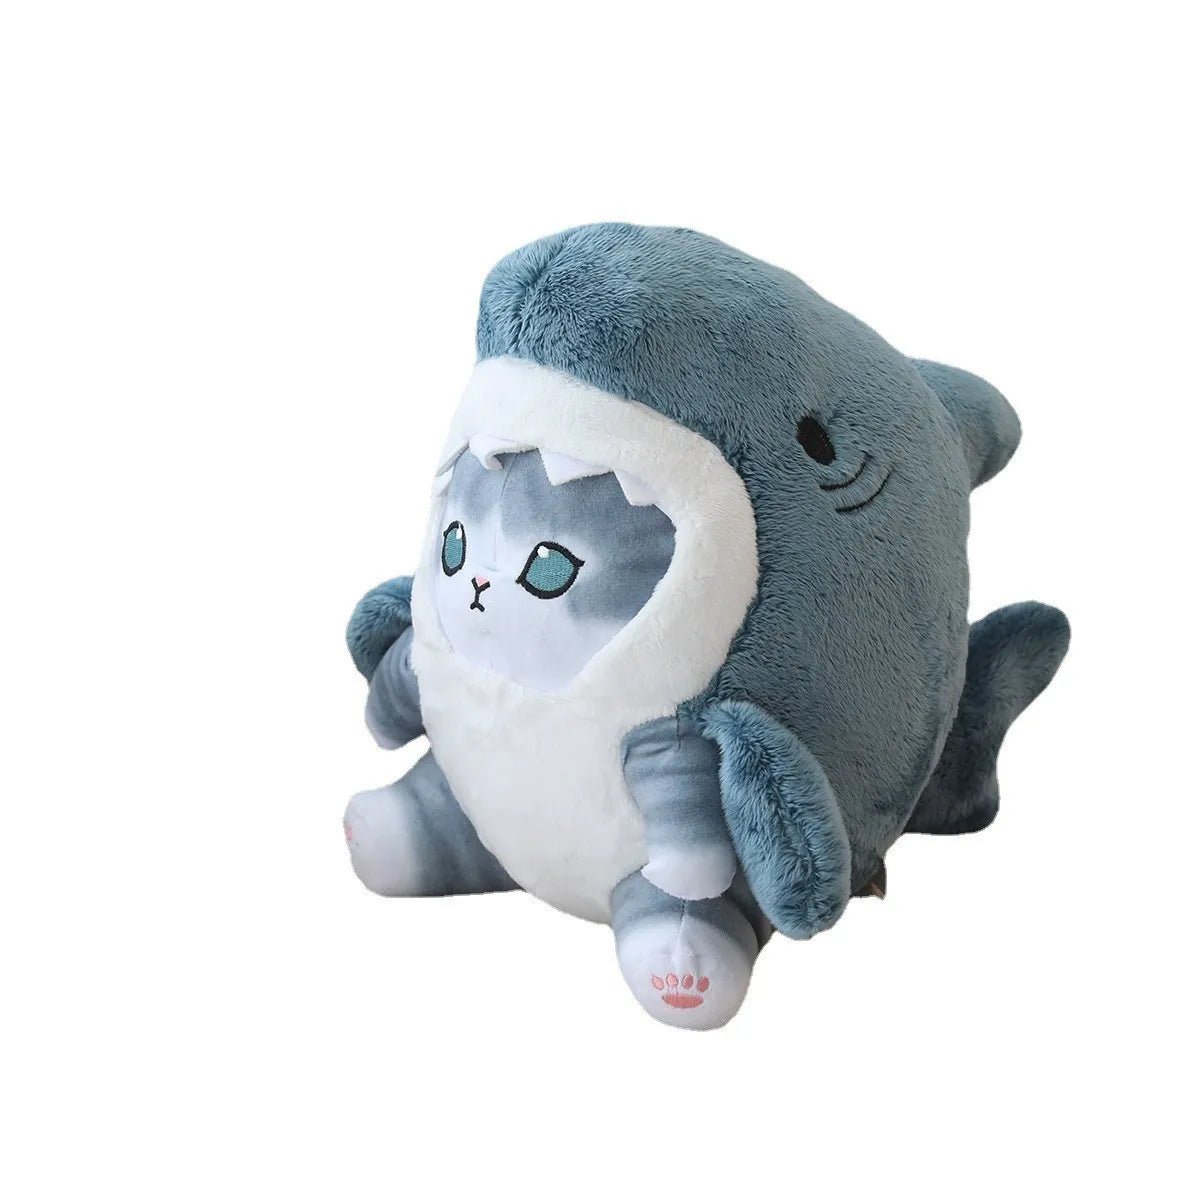 Cute Shark Cat Plush Toy Stuffed Animal Plushies Doll, Gifts For